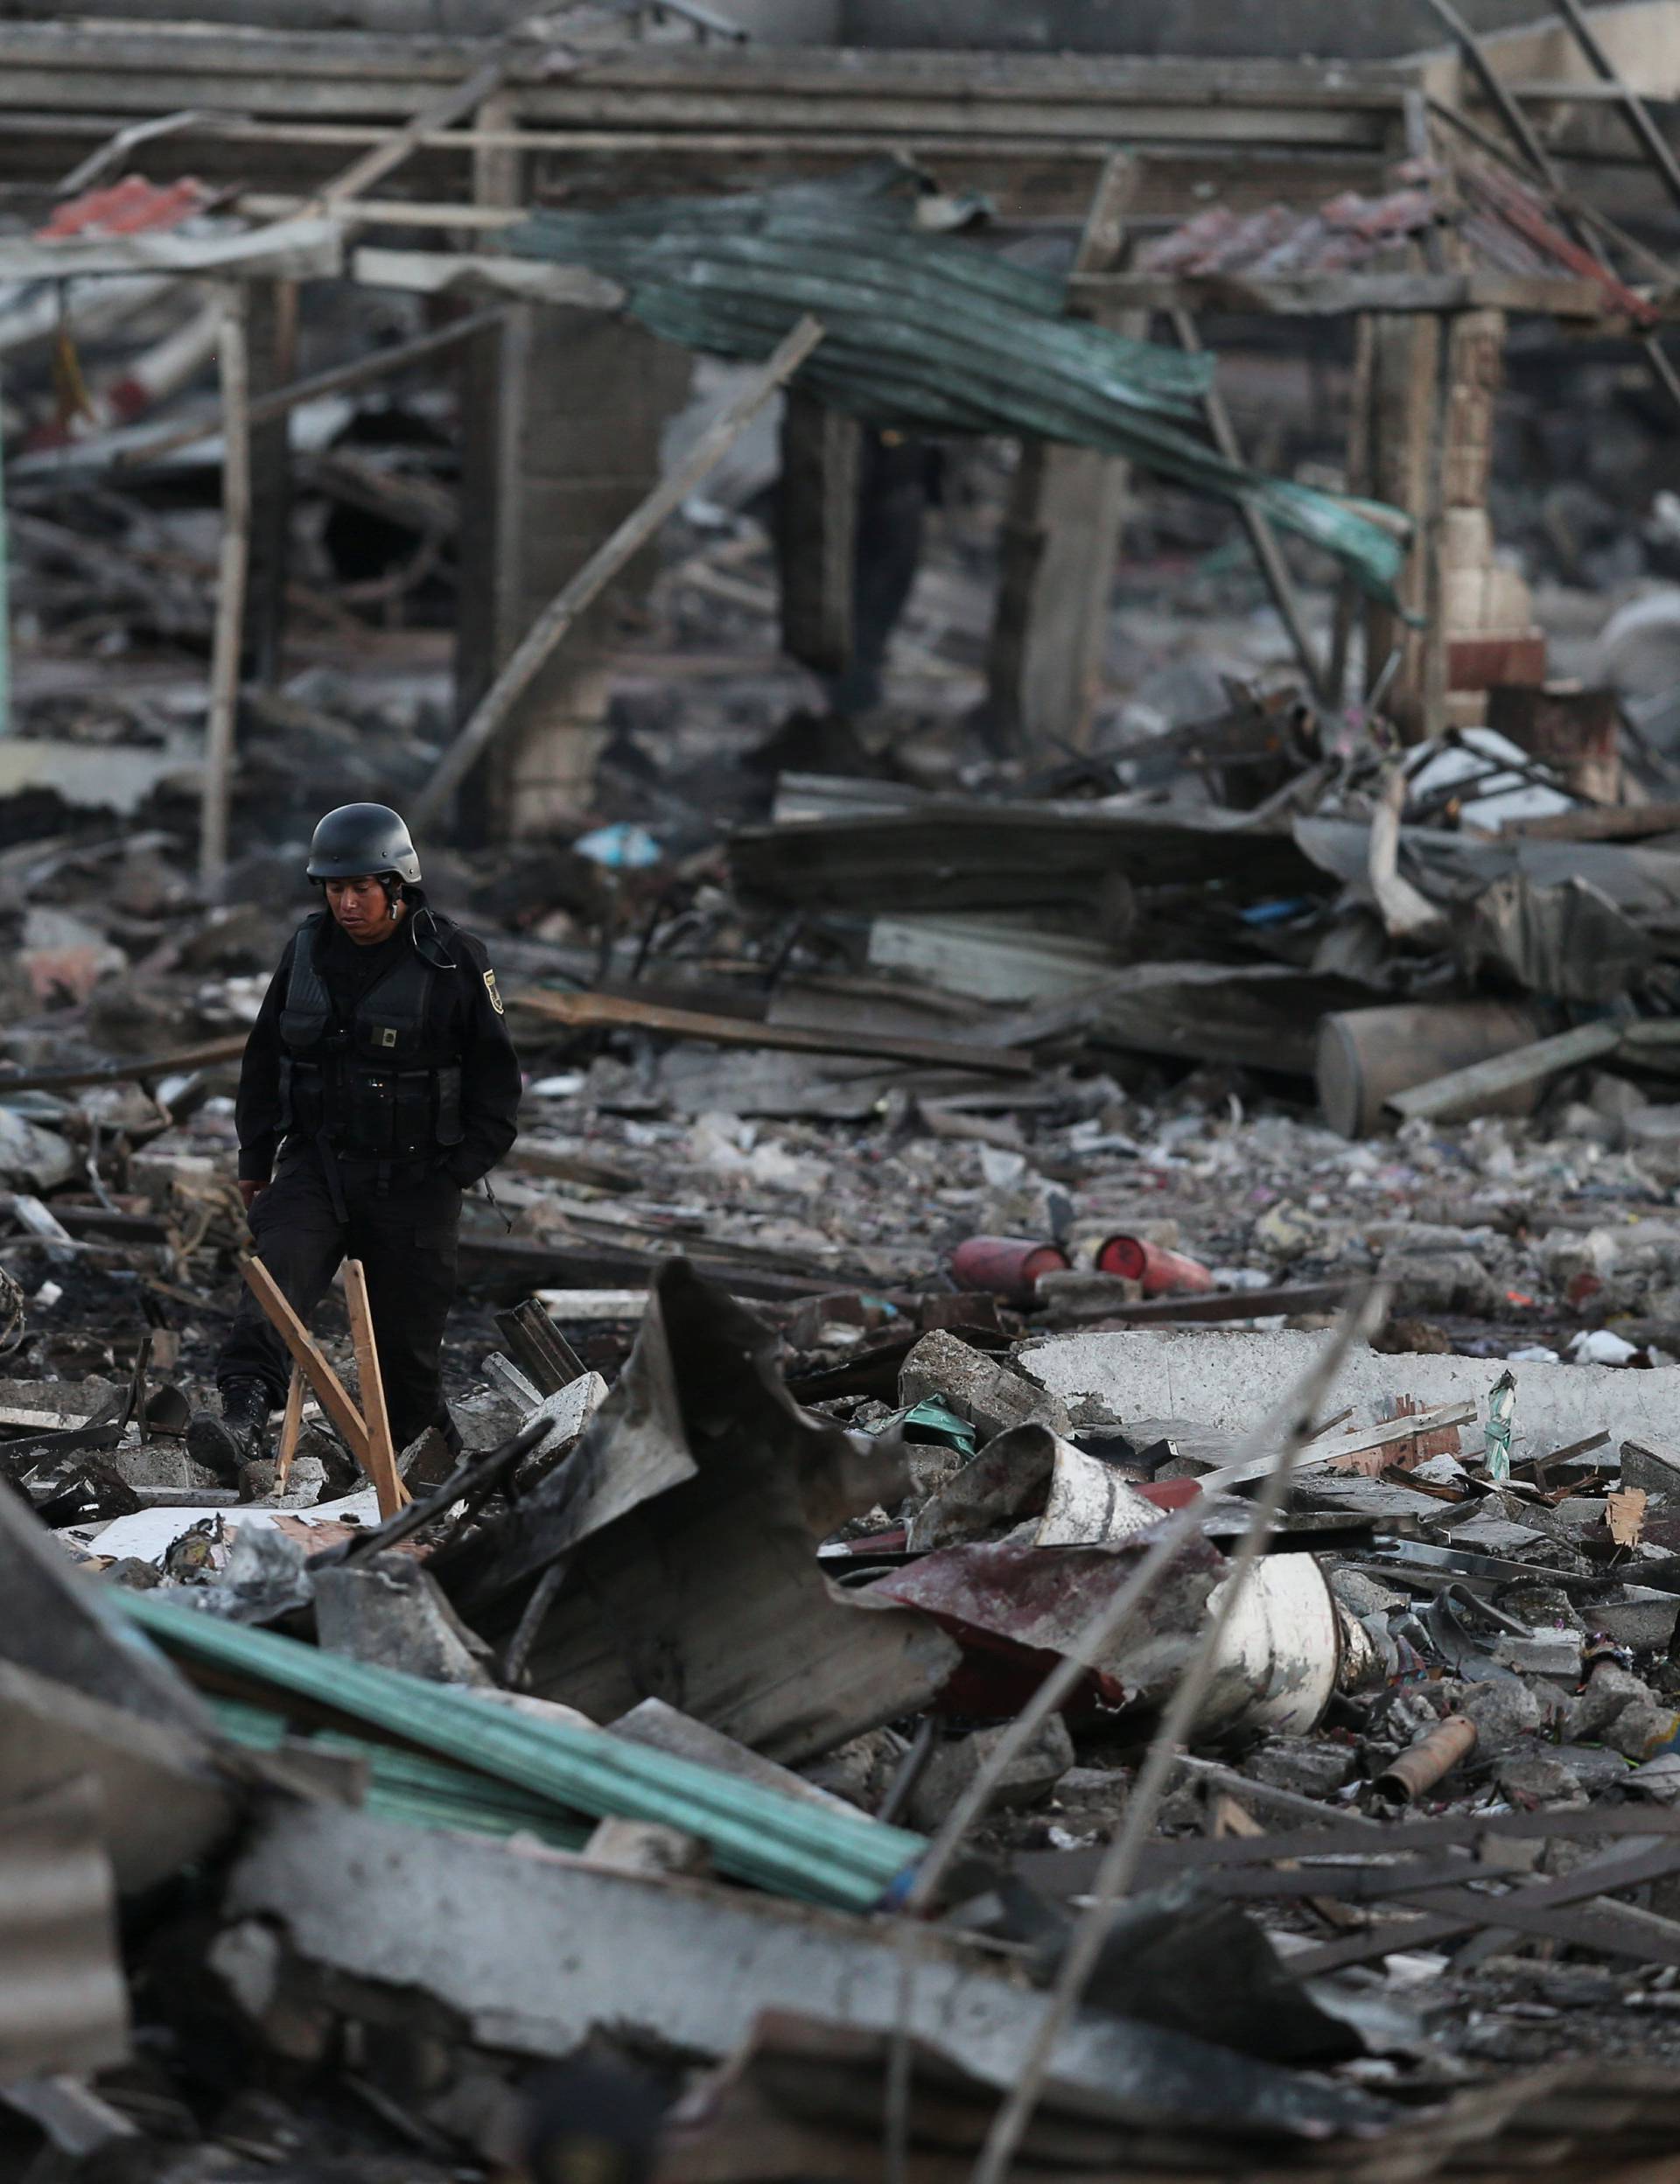 A police officer walks through the remains of houses destroyed in an explosion at the San Pablito fireworks market in Tultepec